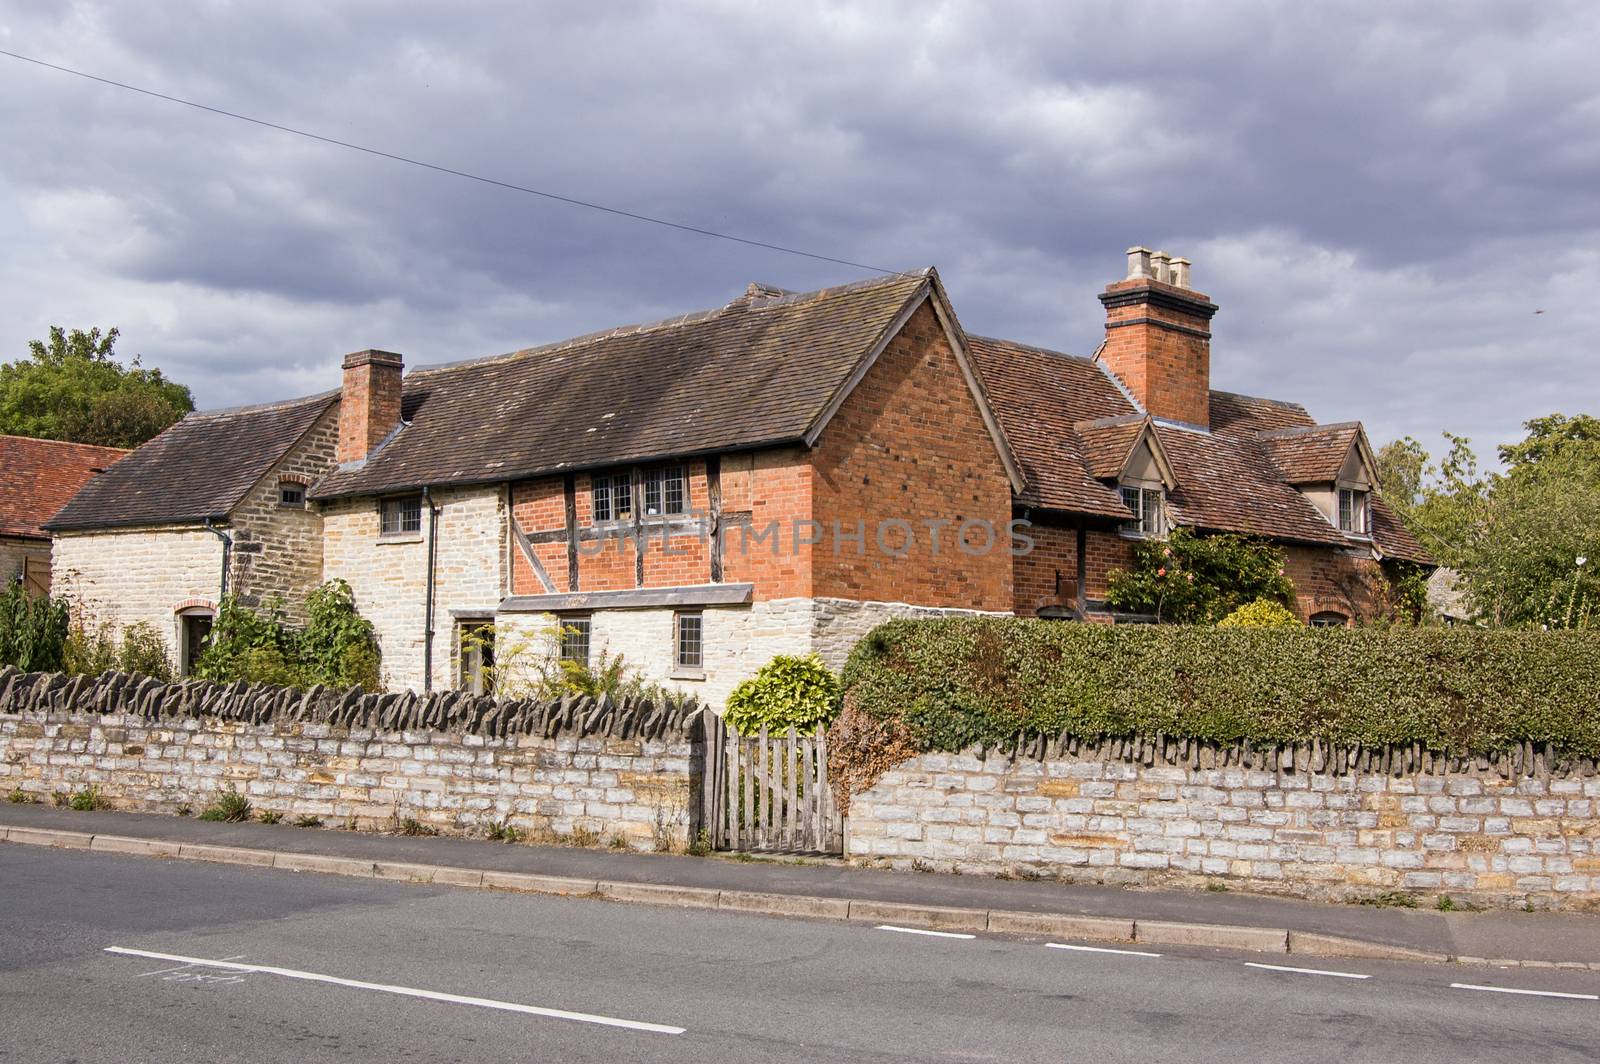 The medieval farmhouse in Wilmcote near Stratford Upon Avon which was home to the mother and grandparents of the playwright William Shakespeare.